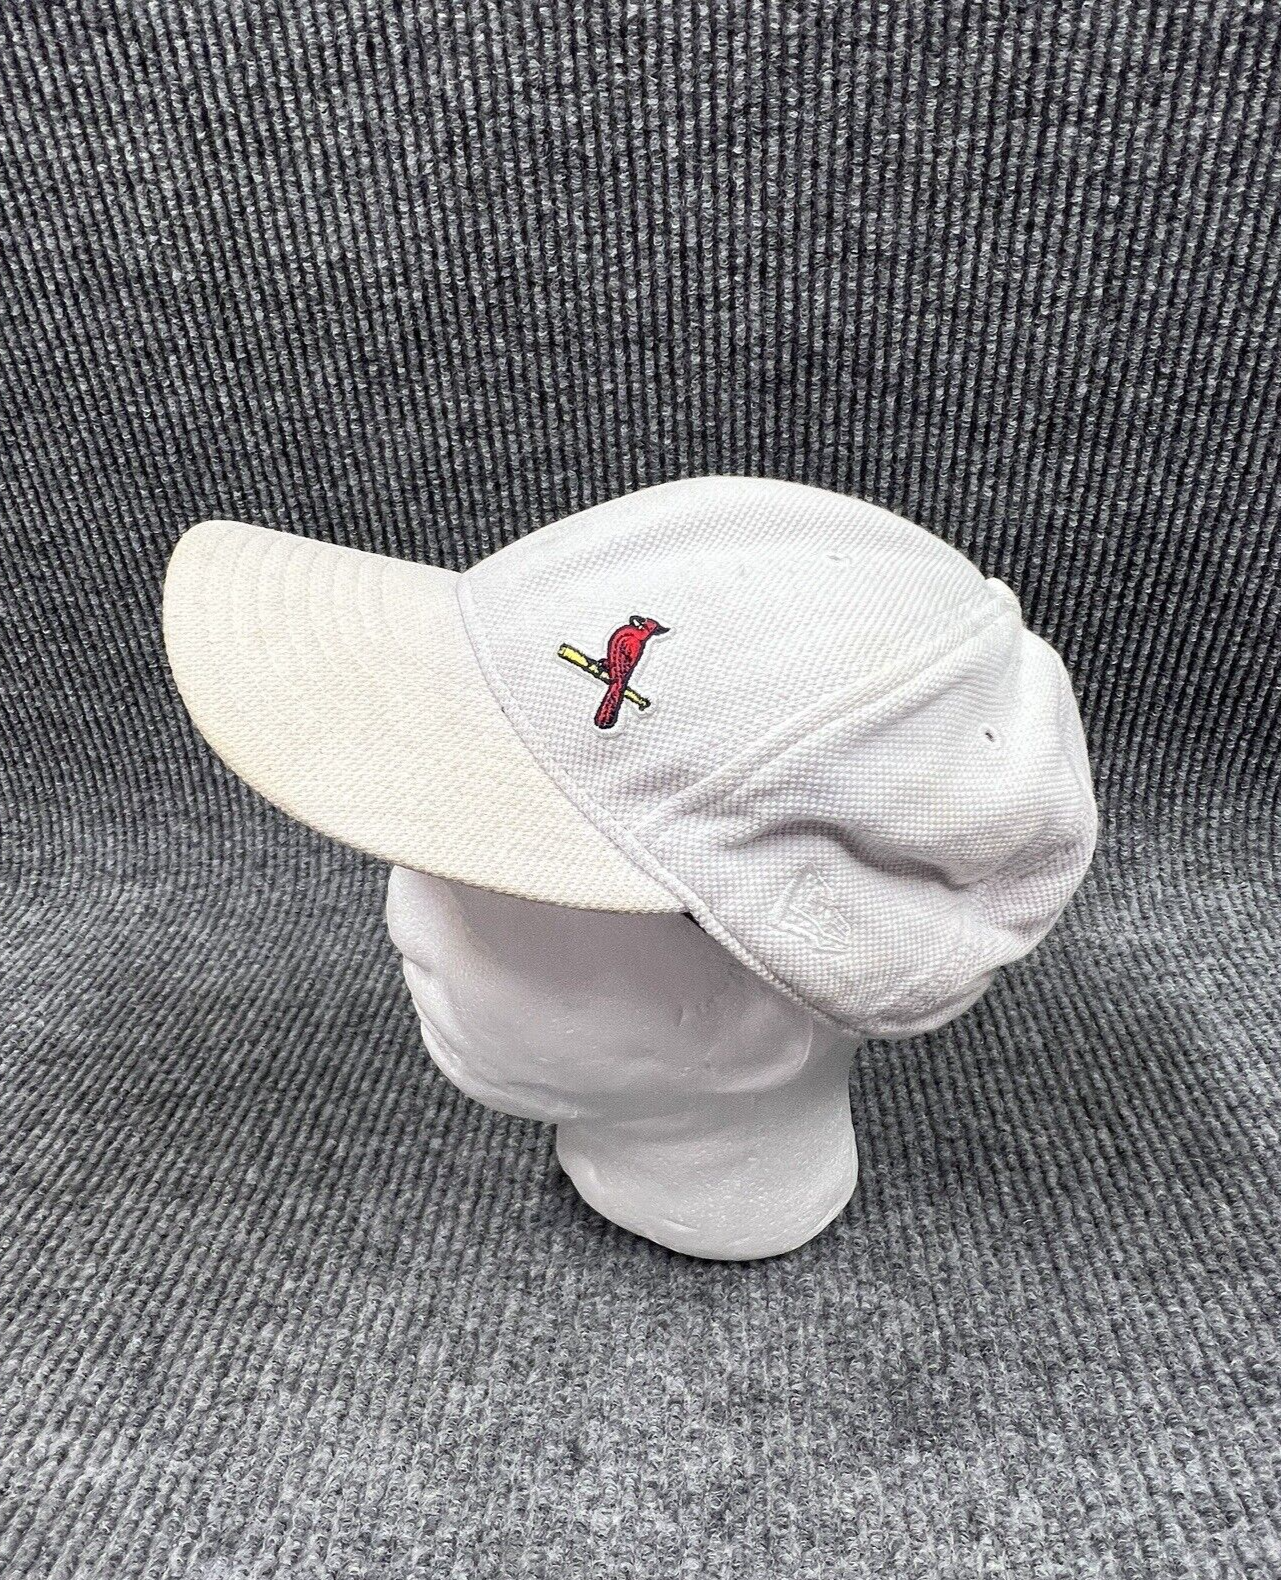 VTG St. Louis Cardinals Hat New Era 59FIFTY White MLB Fitted 7 1/4 Cap Red Bird - $23.92